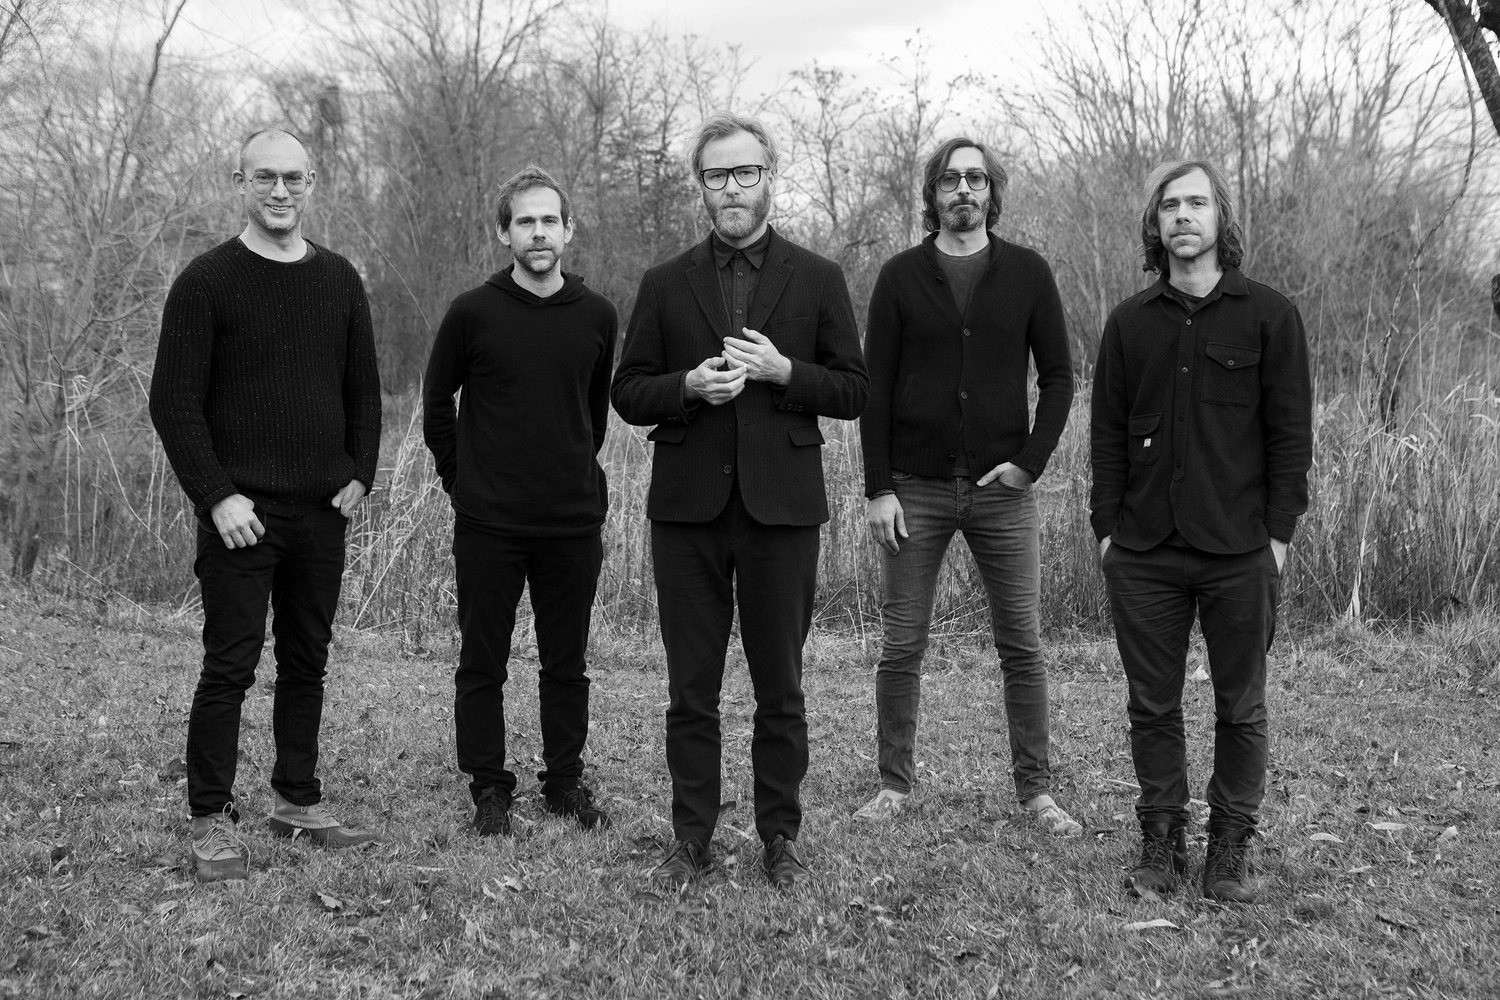 Deep cuts: seven of The National's unsung delights